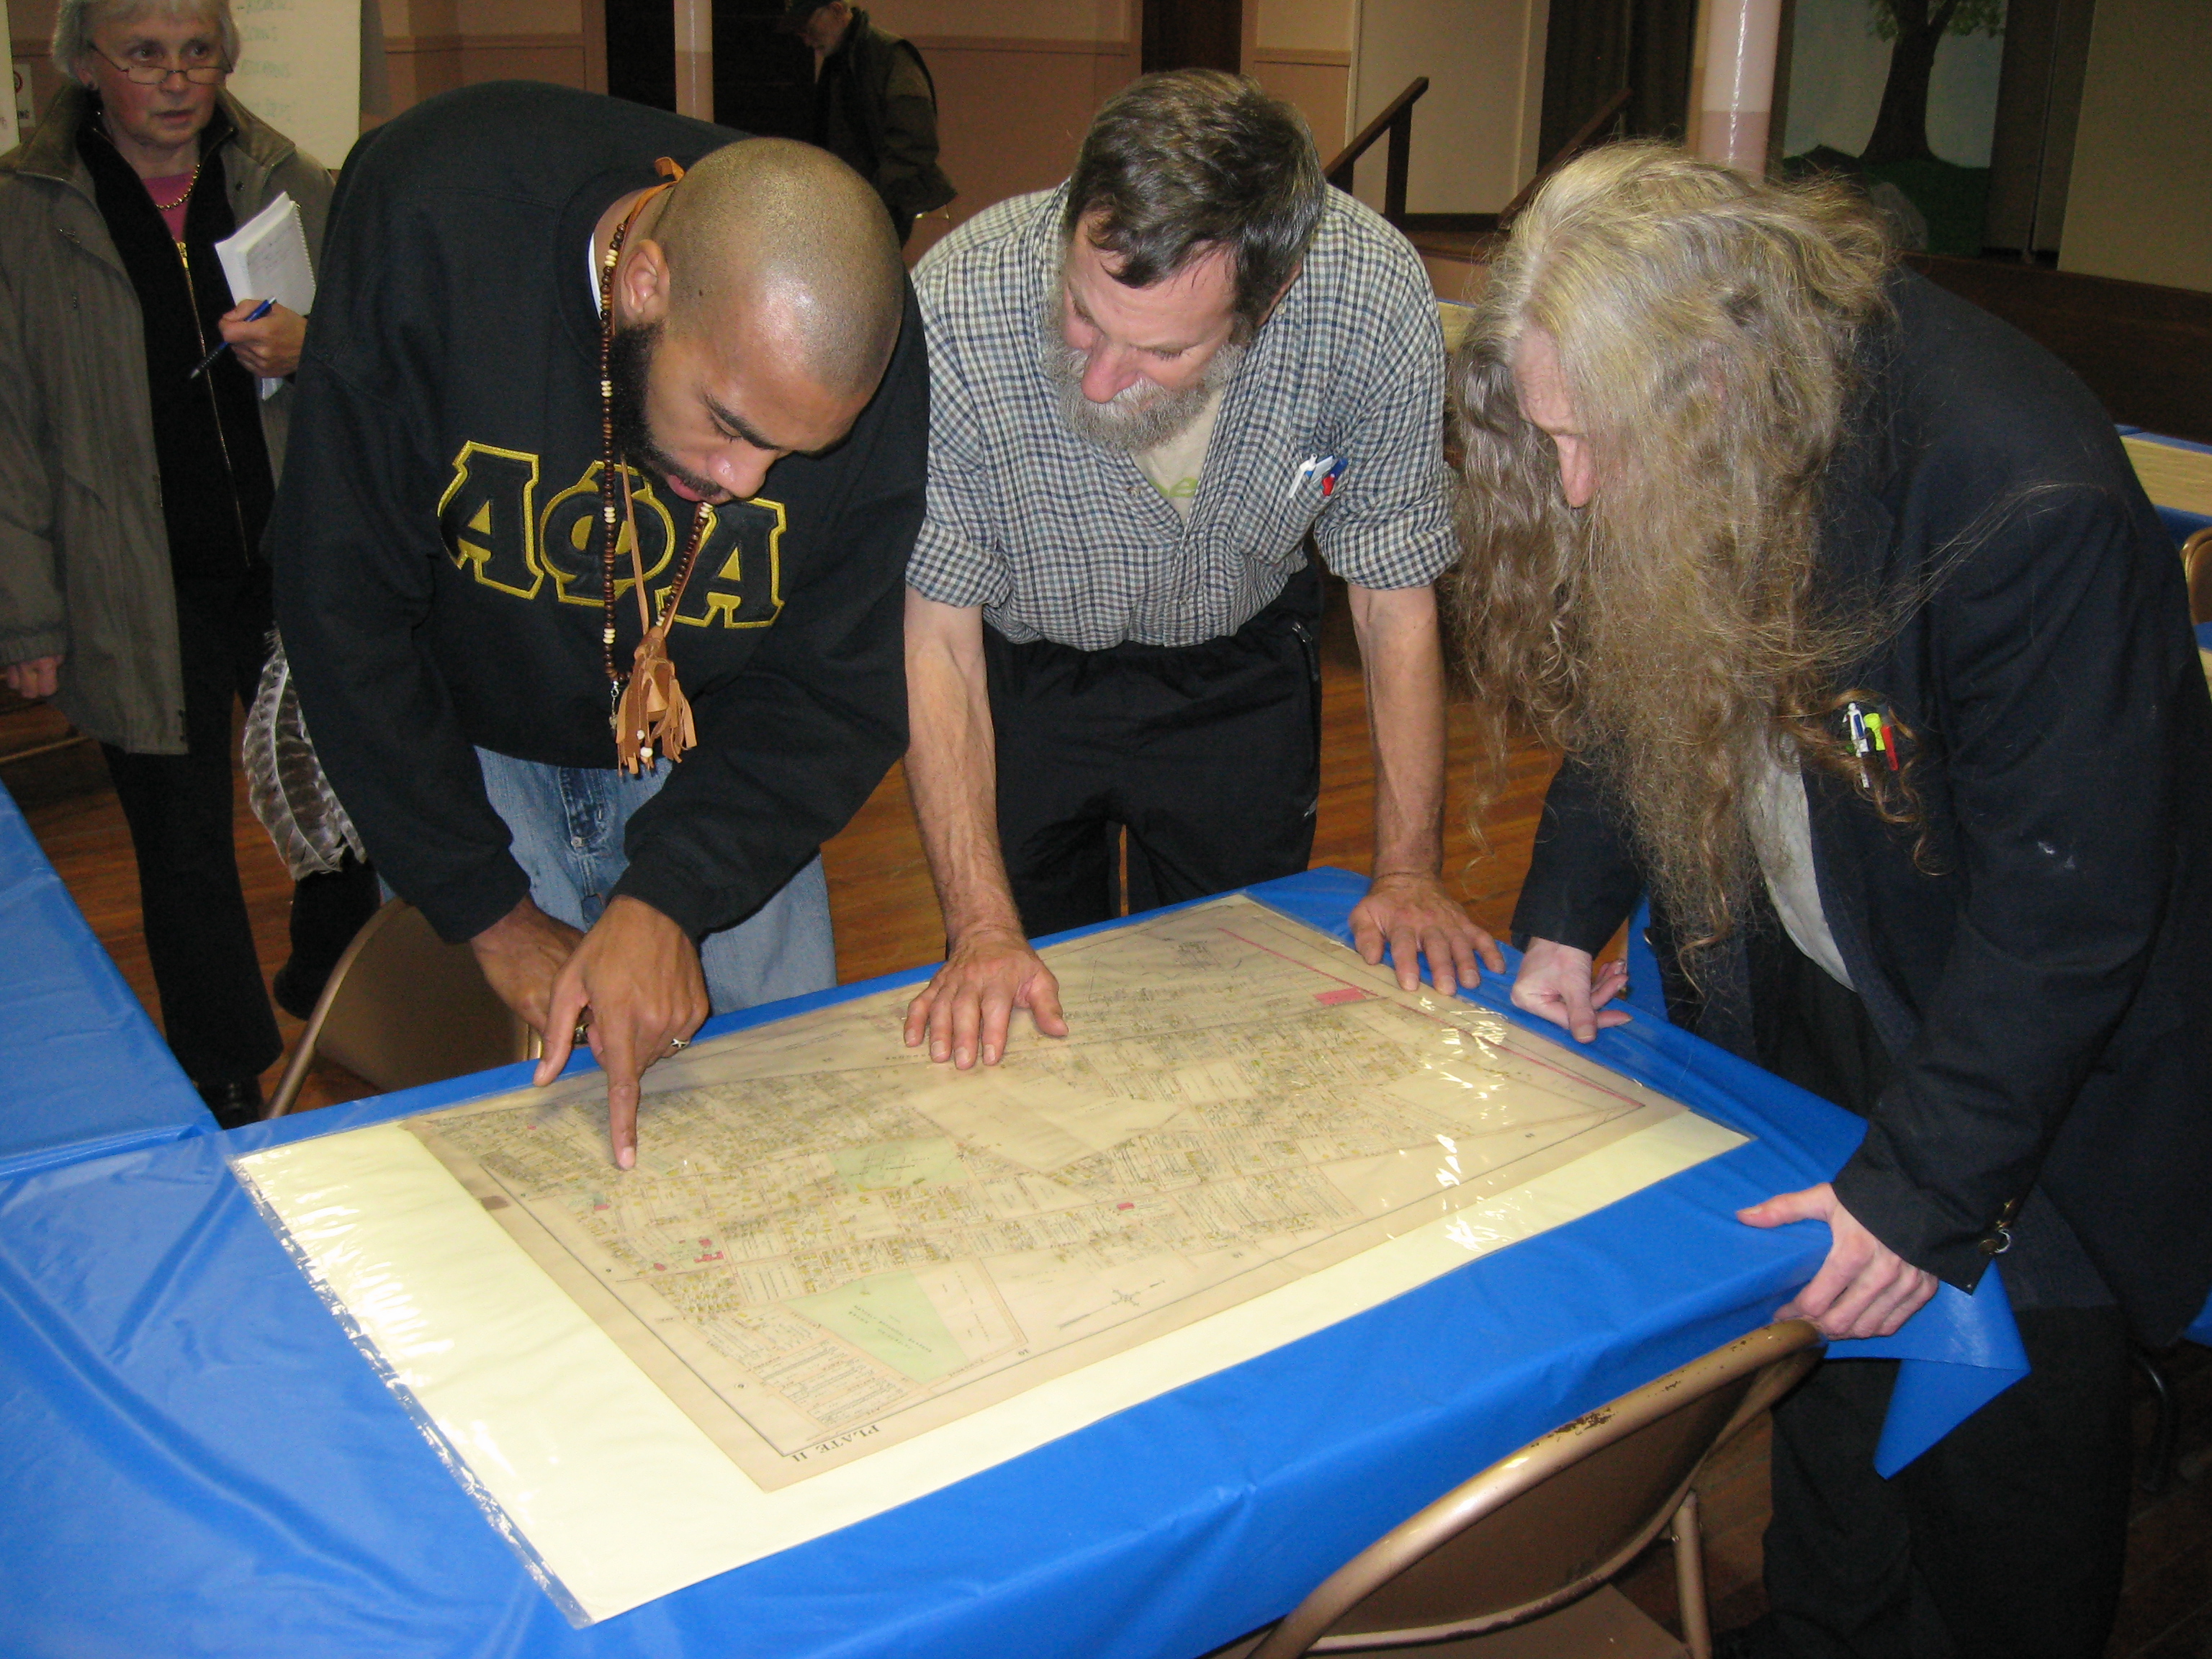 Ray Watson, Greg Gerritt and David Kolsky find their bearings on an insurance map from the early 20th century.